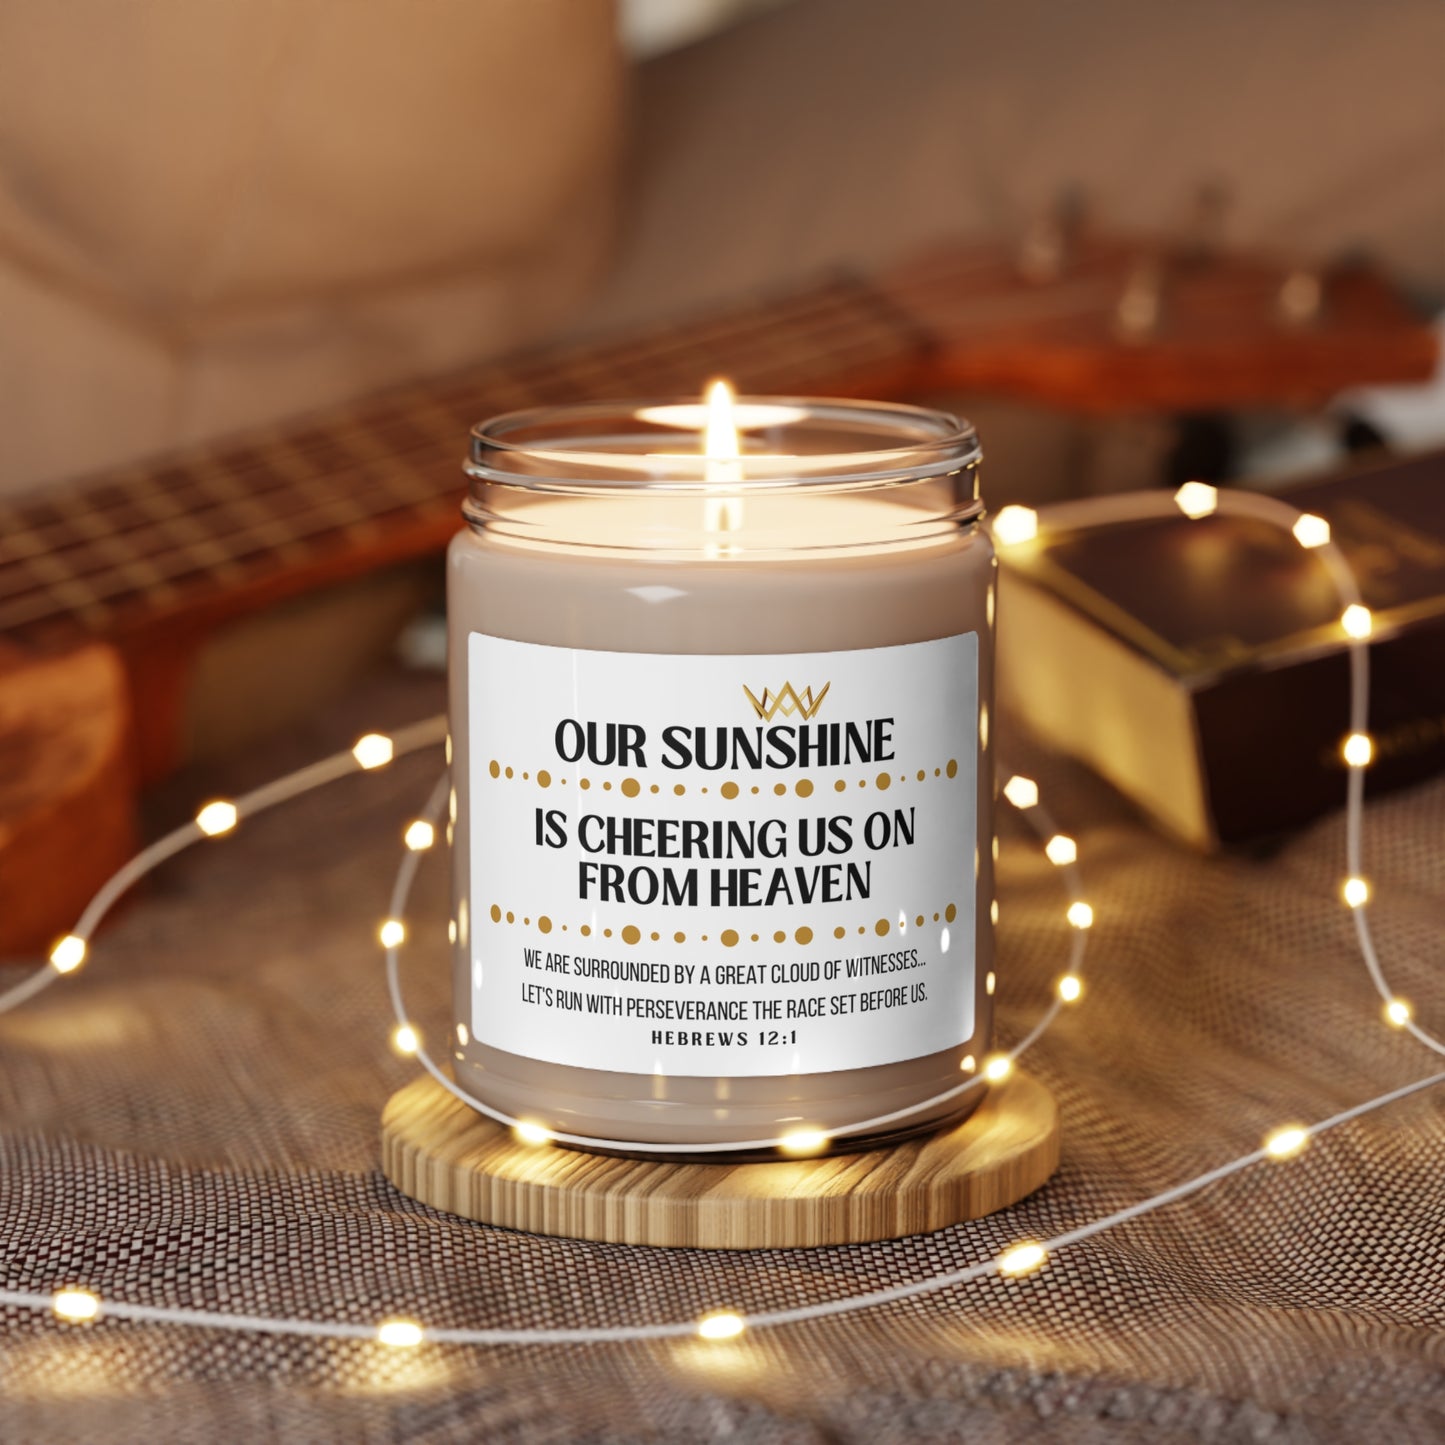 Our Sunshine Memorial Scented Soy Candle, Cheering Us On From Heaven